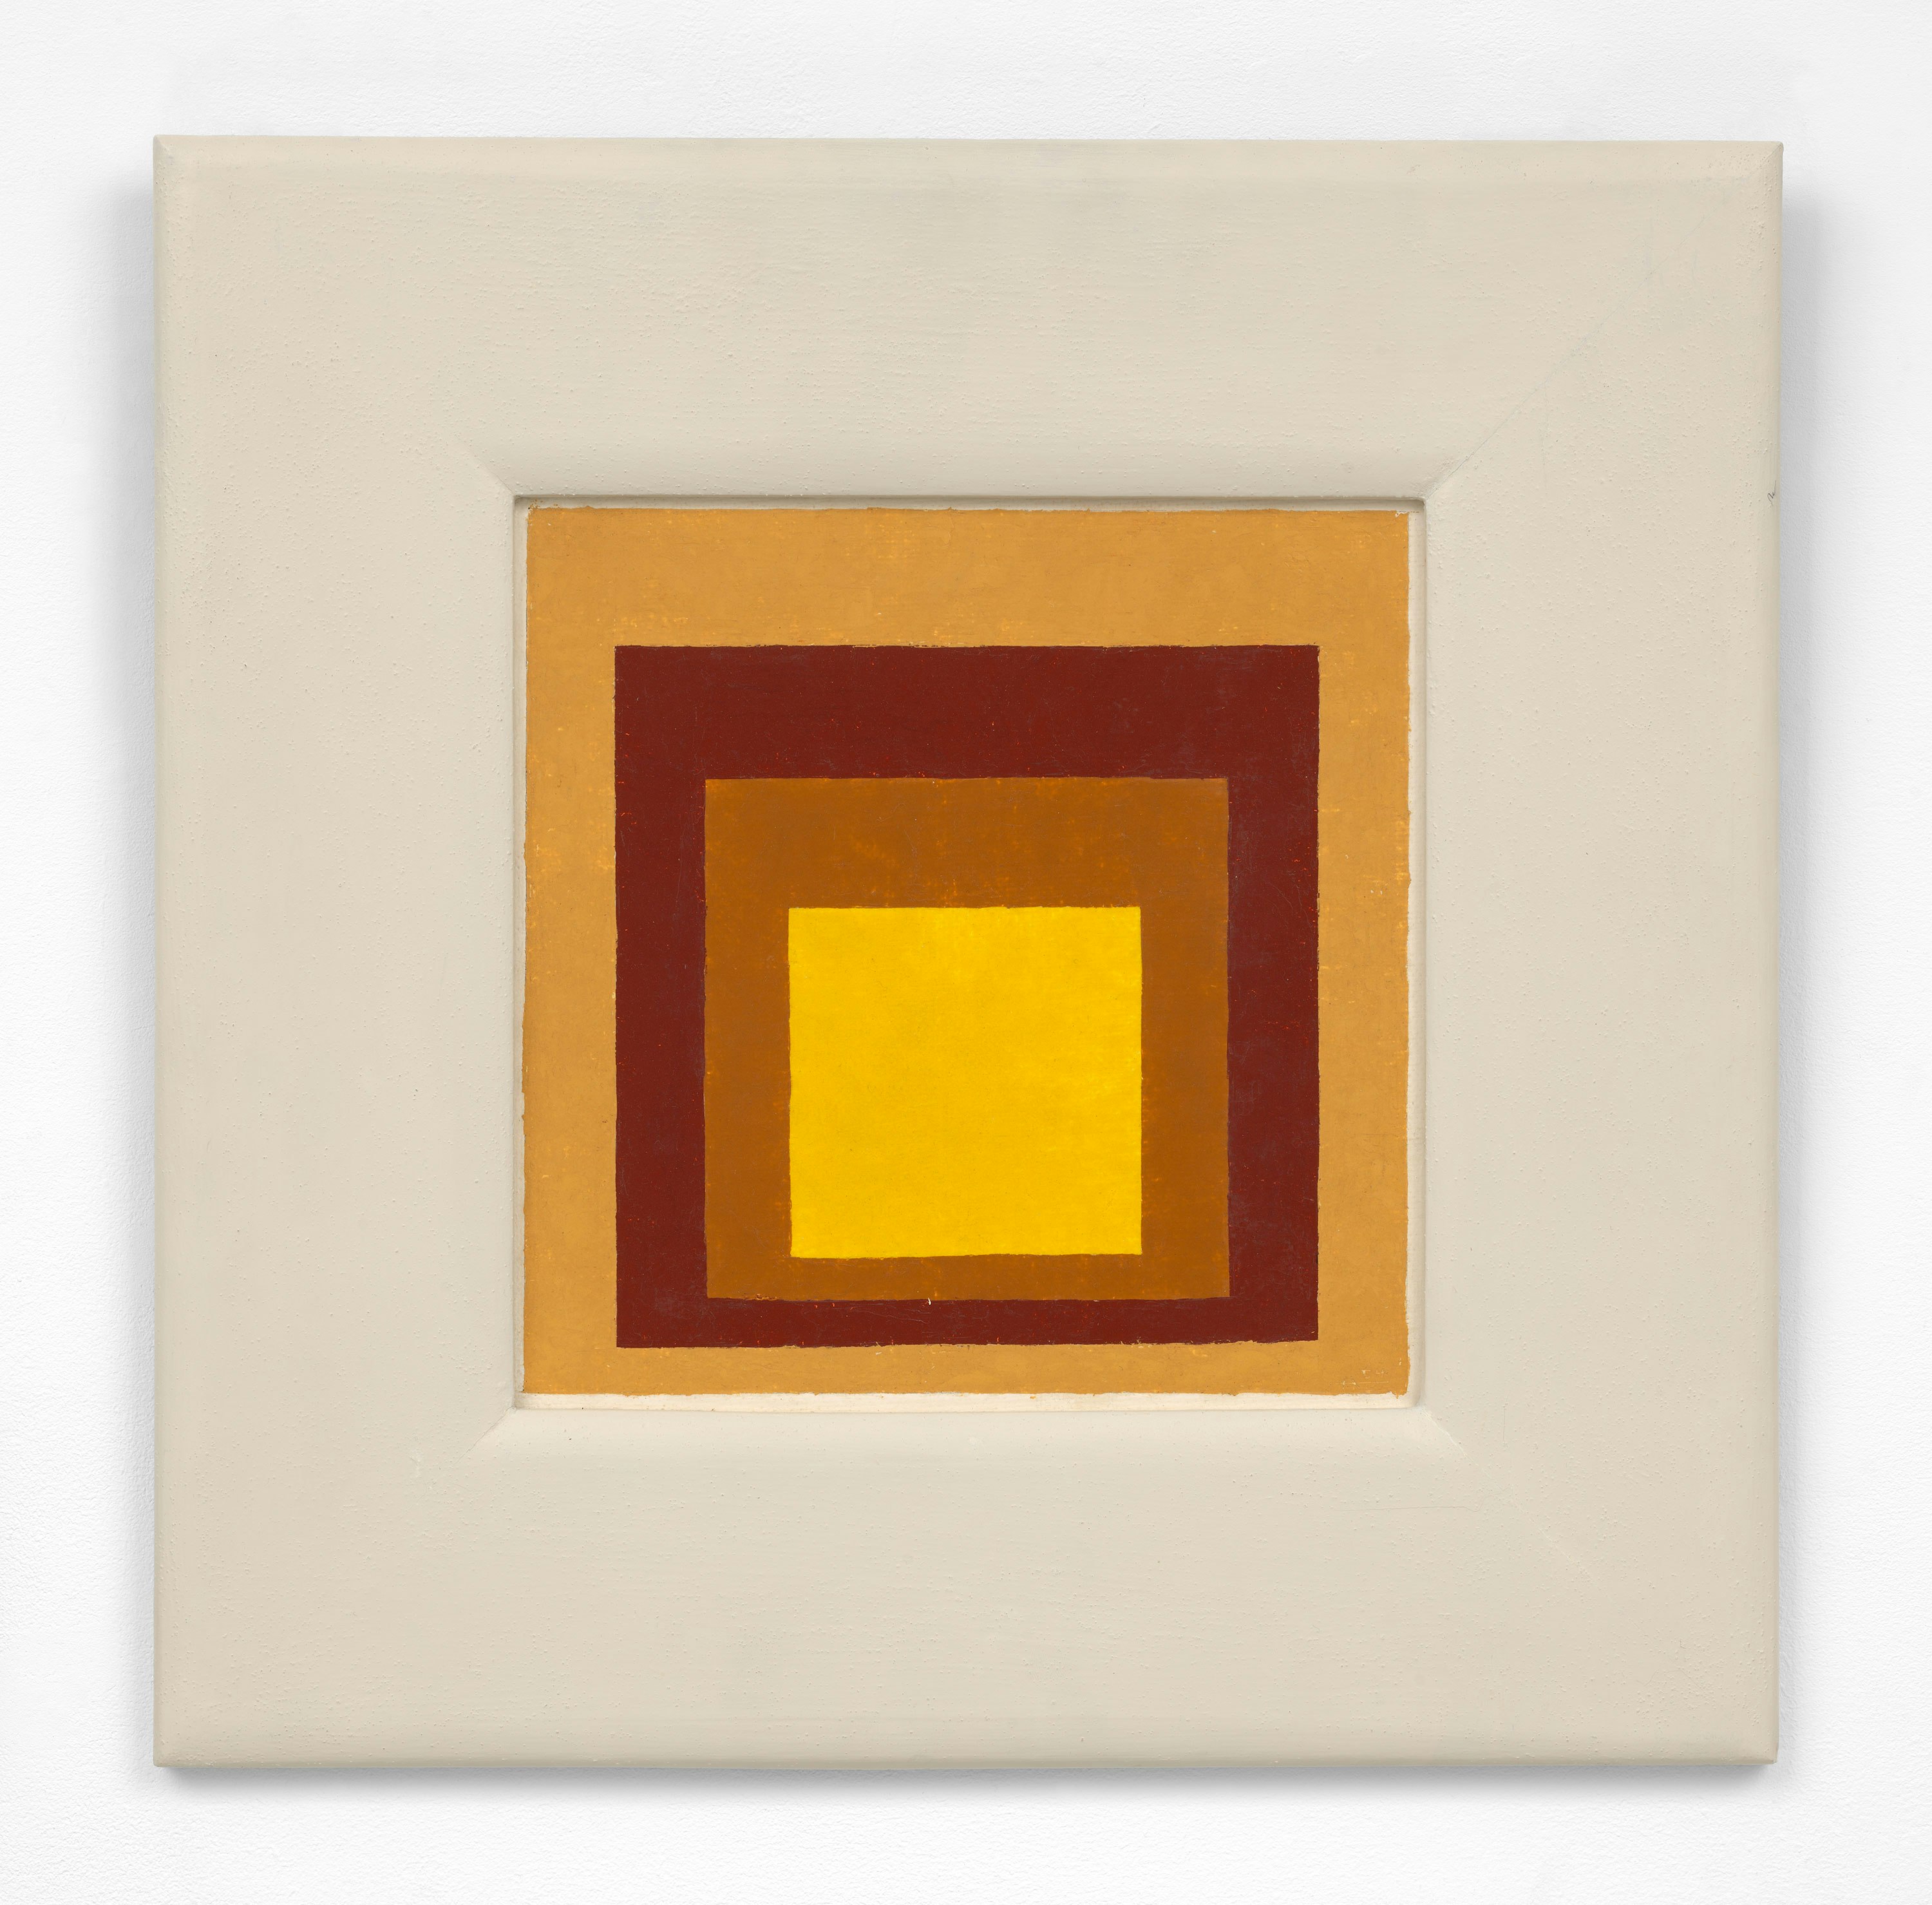 Josef Albers, <em>Study to Homage to the Square</em>, 1954. © The Josef and Anni Albers Foundation / Artists Rights Society (ARS), New York. Courtesy The Josef and Anni Albers Foundation and David Zwirner.